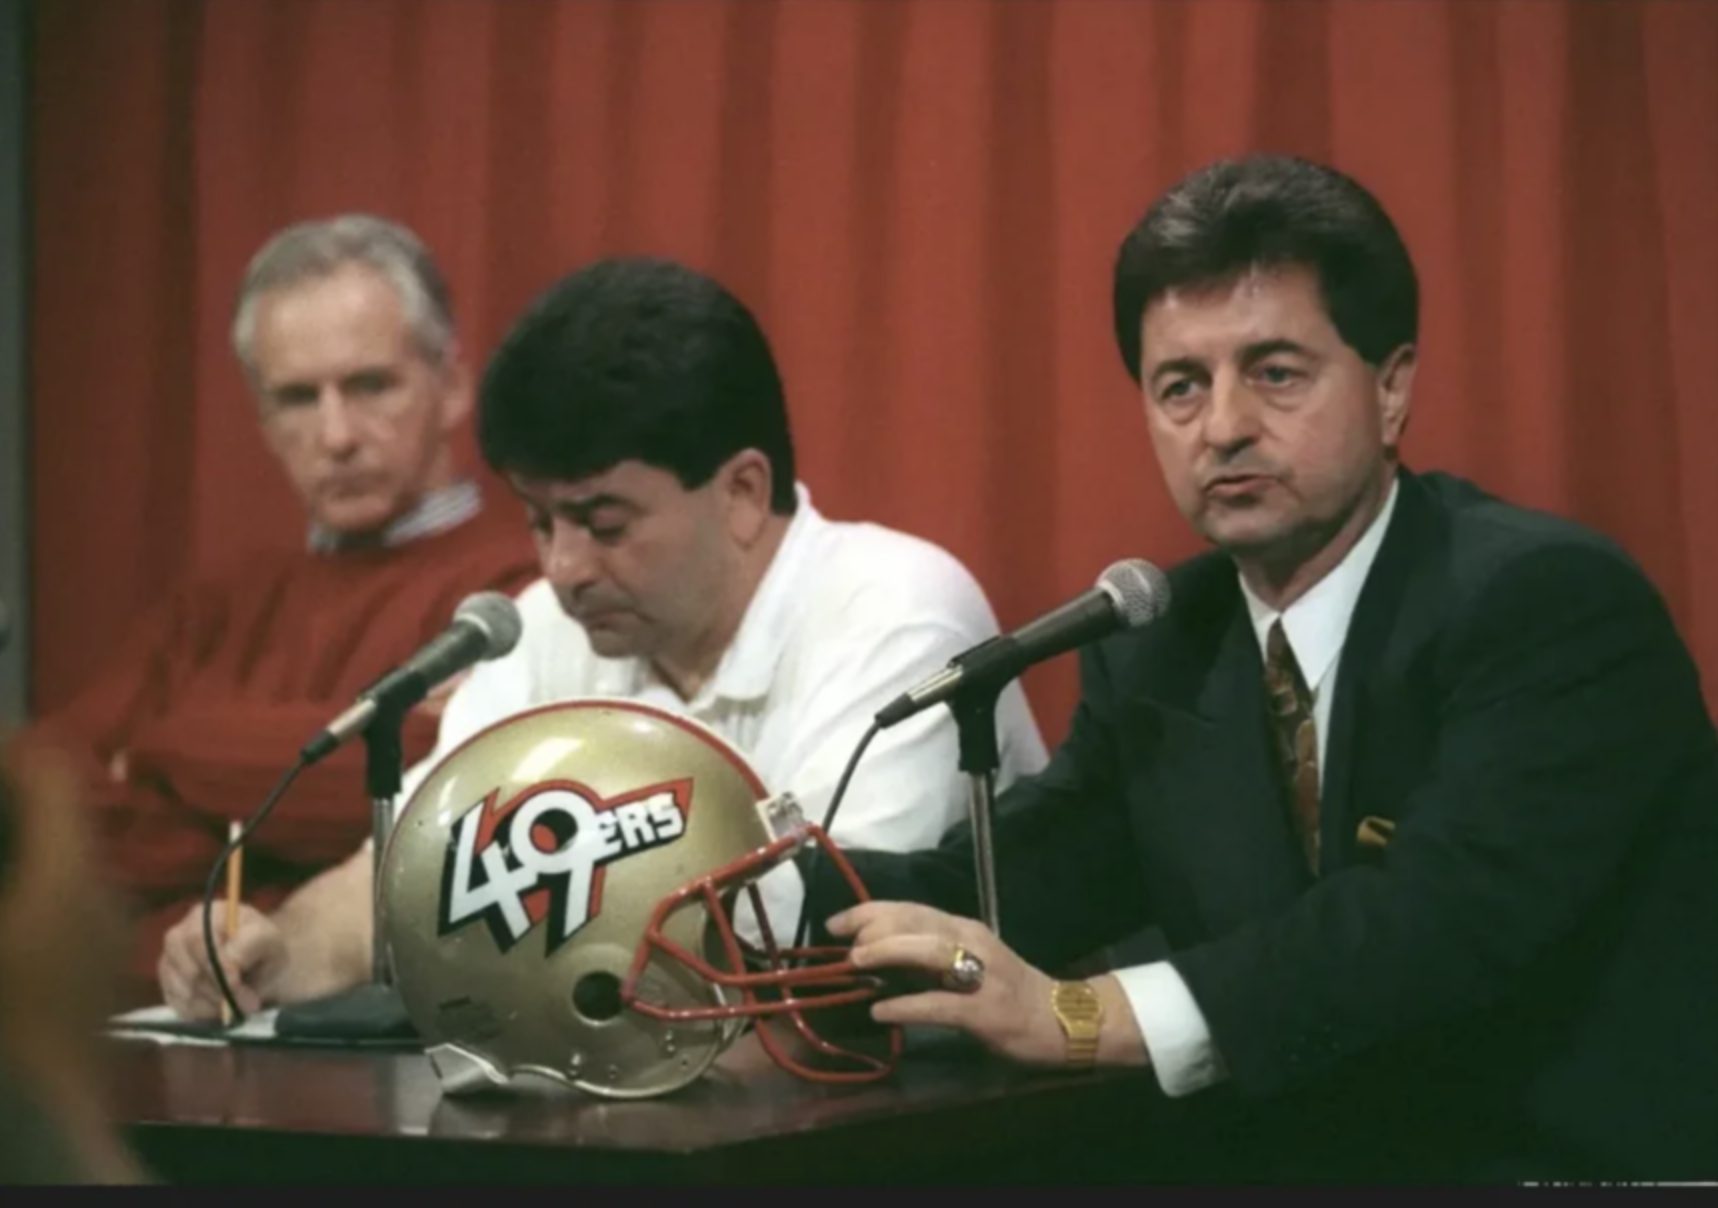 “The San Francisco 49ers tried to introduce a new logo in the early 90’s and it was honestly pretty ugly and bad. A ‘what were you trying to accomplish?’ decision and this was in the years when they were winning like every other Super Bowl so people had grown attached to the look the team had worn to great success. Pre internet so the fans flooded the team with letters and calls and picket lines outside the office and the team said ‘fine we won’t use the new logo.’” u/Navyblazers2000